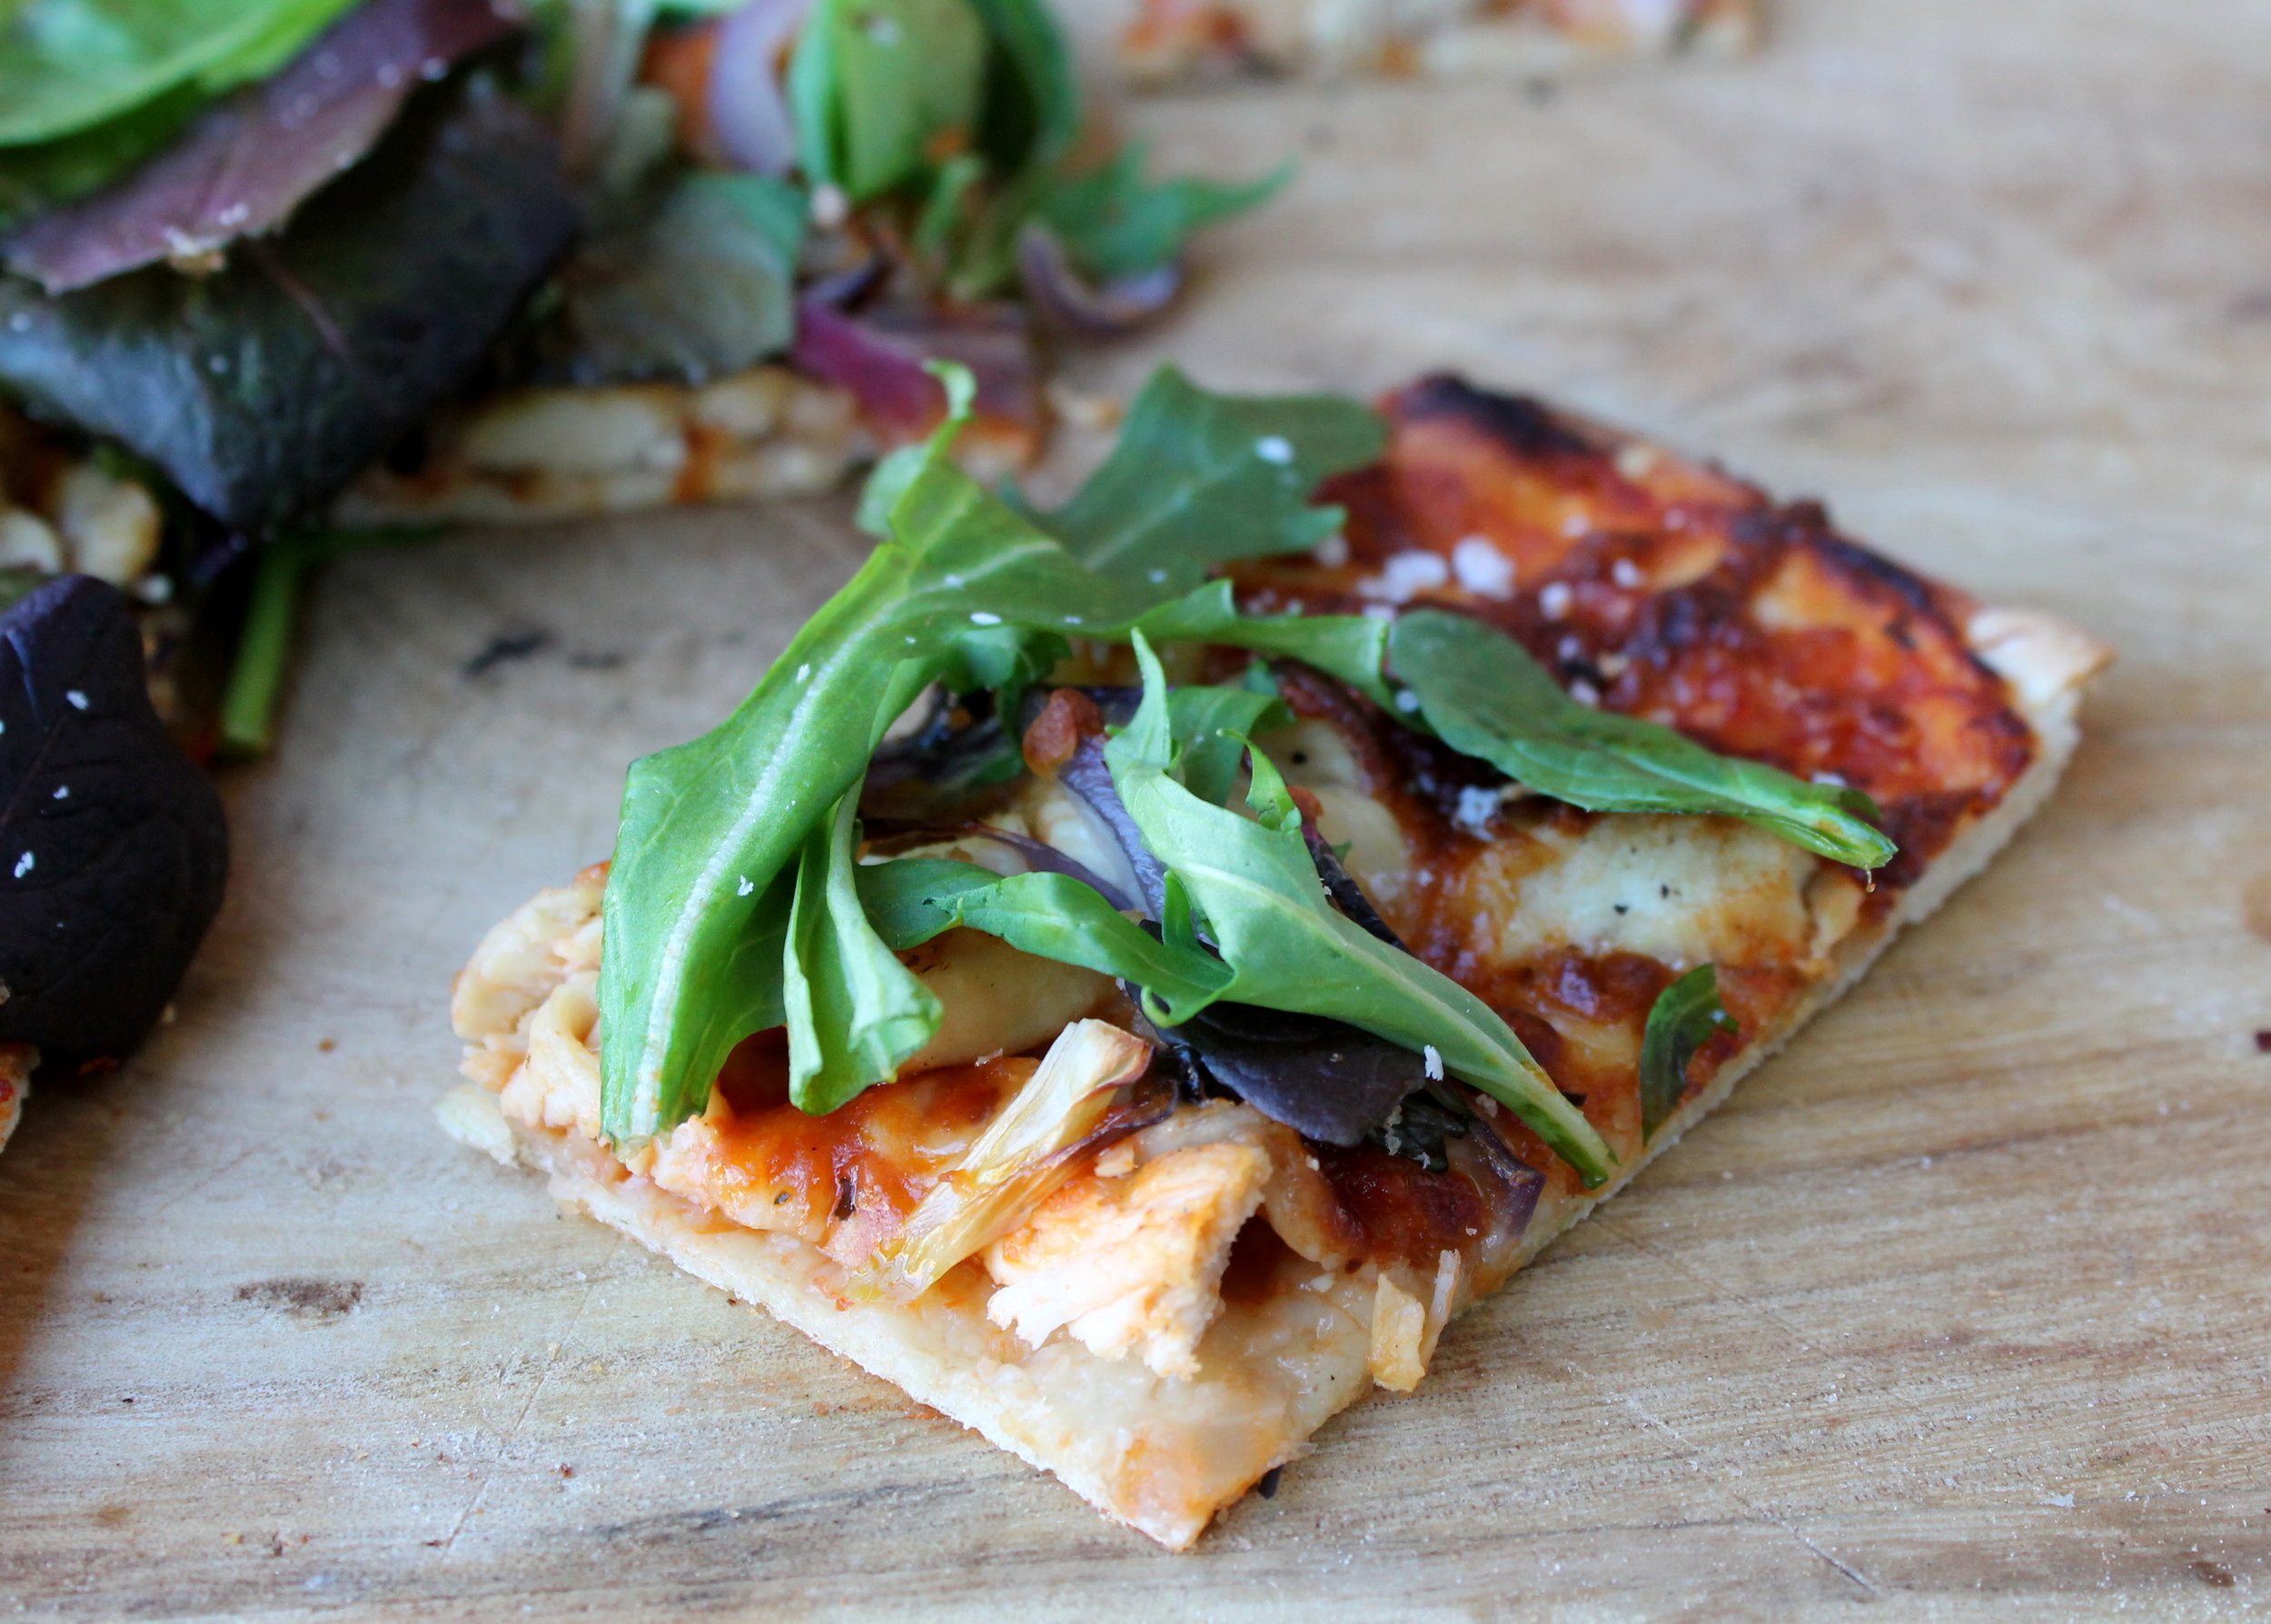 Easy Thin Crust Pizza is a full proof recipe that requires less than an hour to rise. The dough can be pre-made and you can enjoy it with your favorite toppings even on a weeknight.